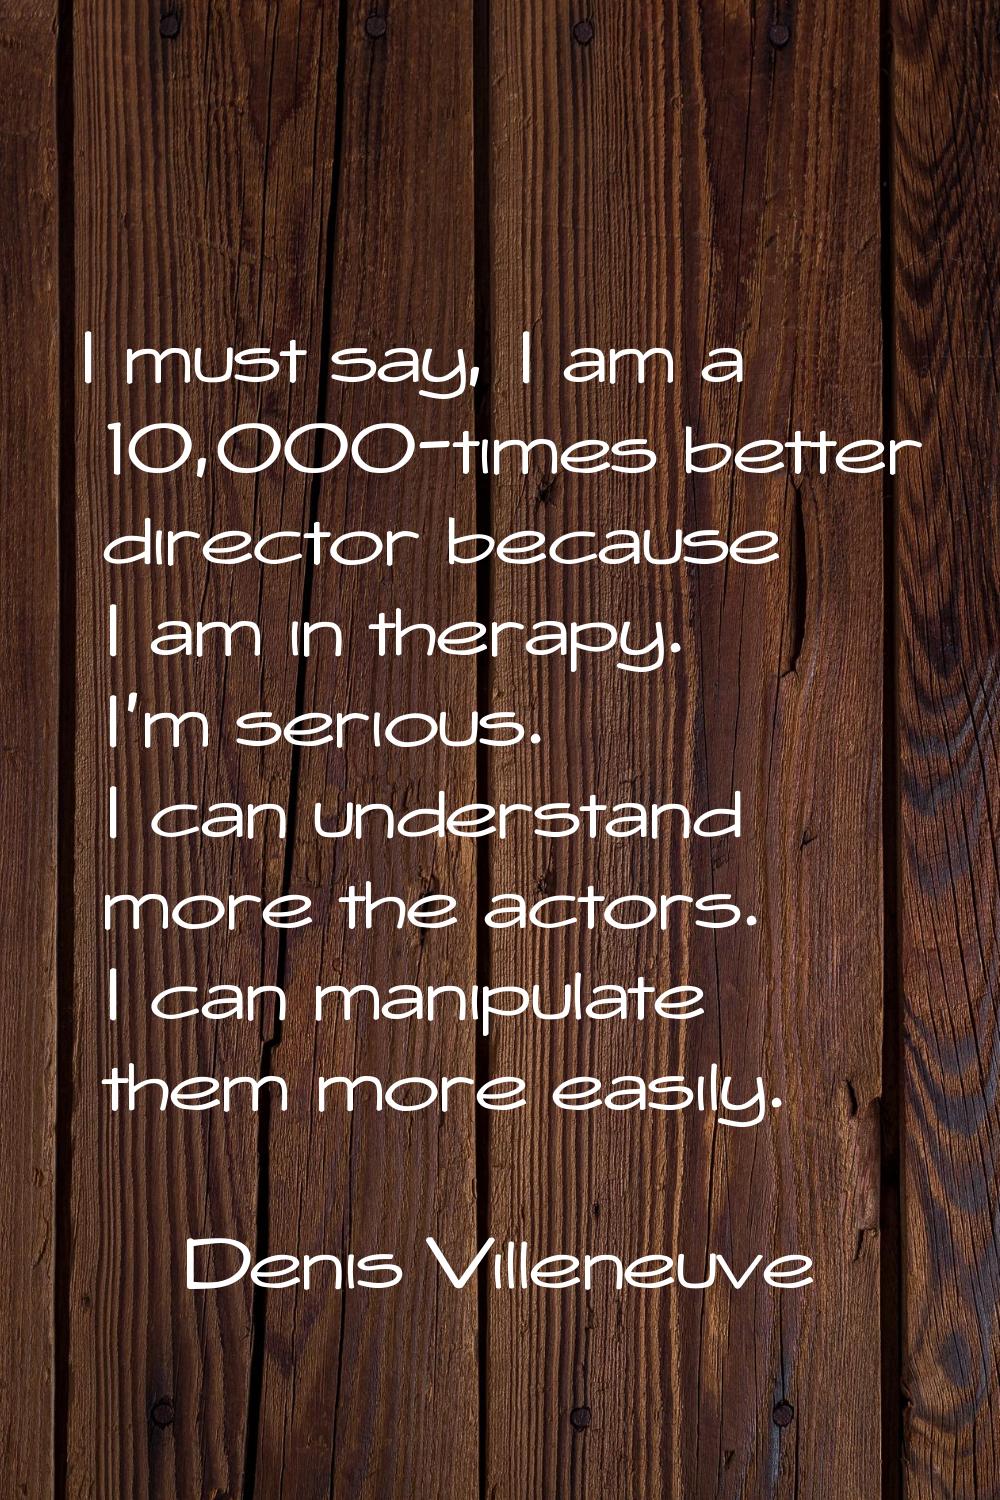 I must say, I am a 10,000-times better director because I am in therapy. I'm serious. I can underst